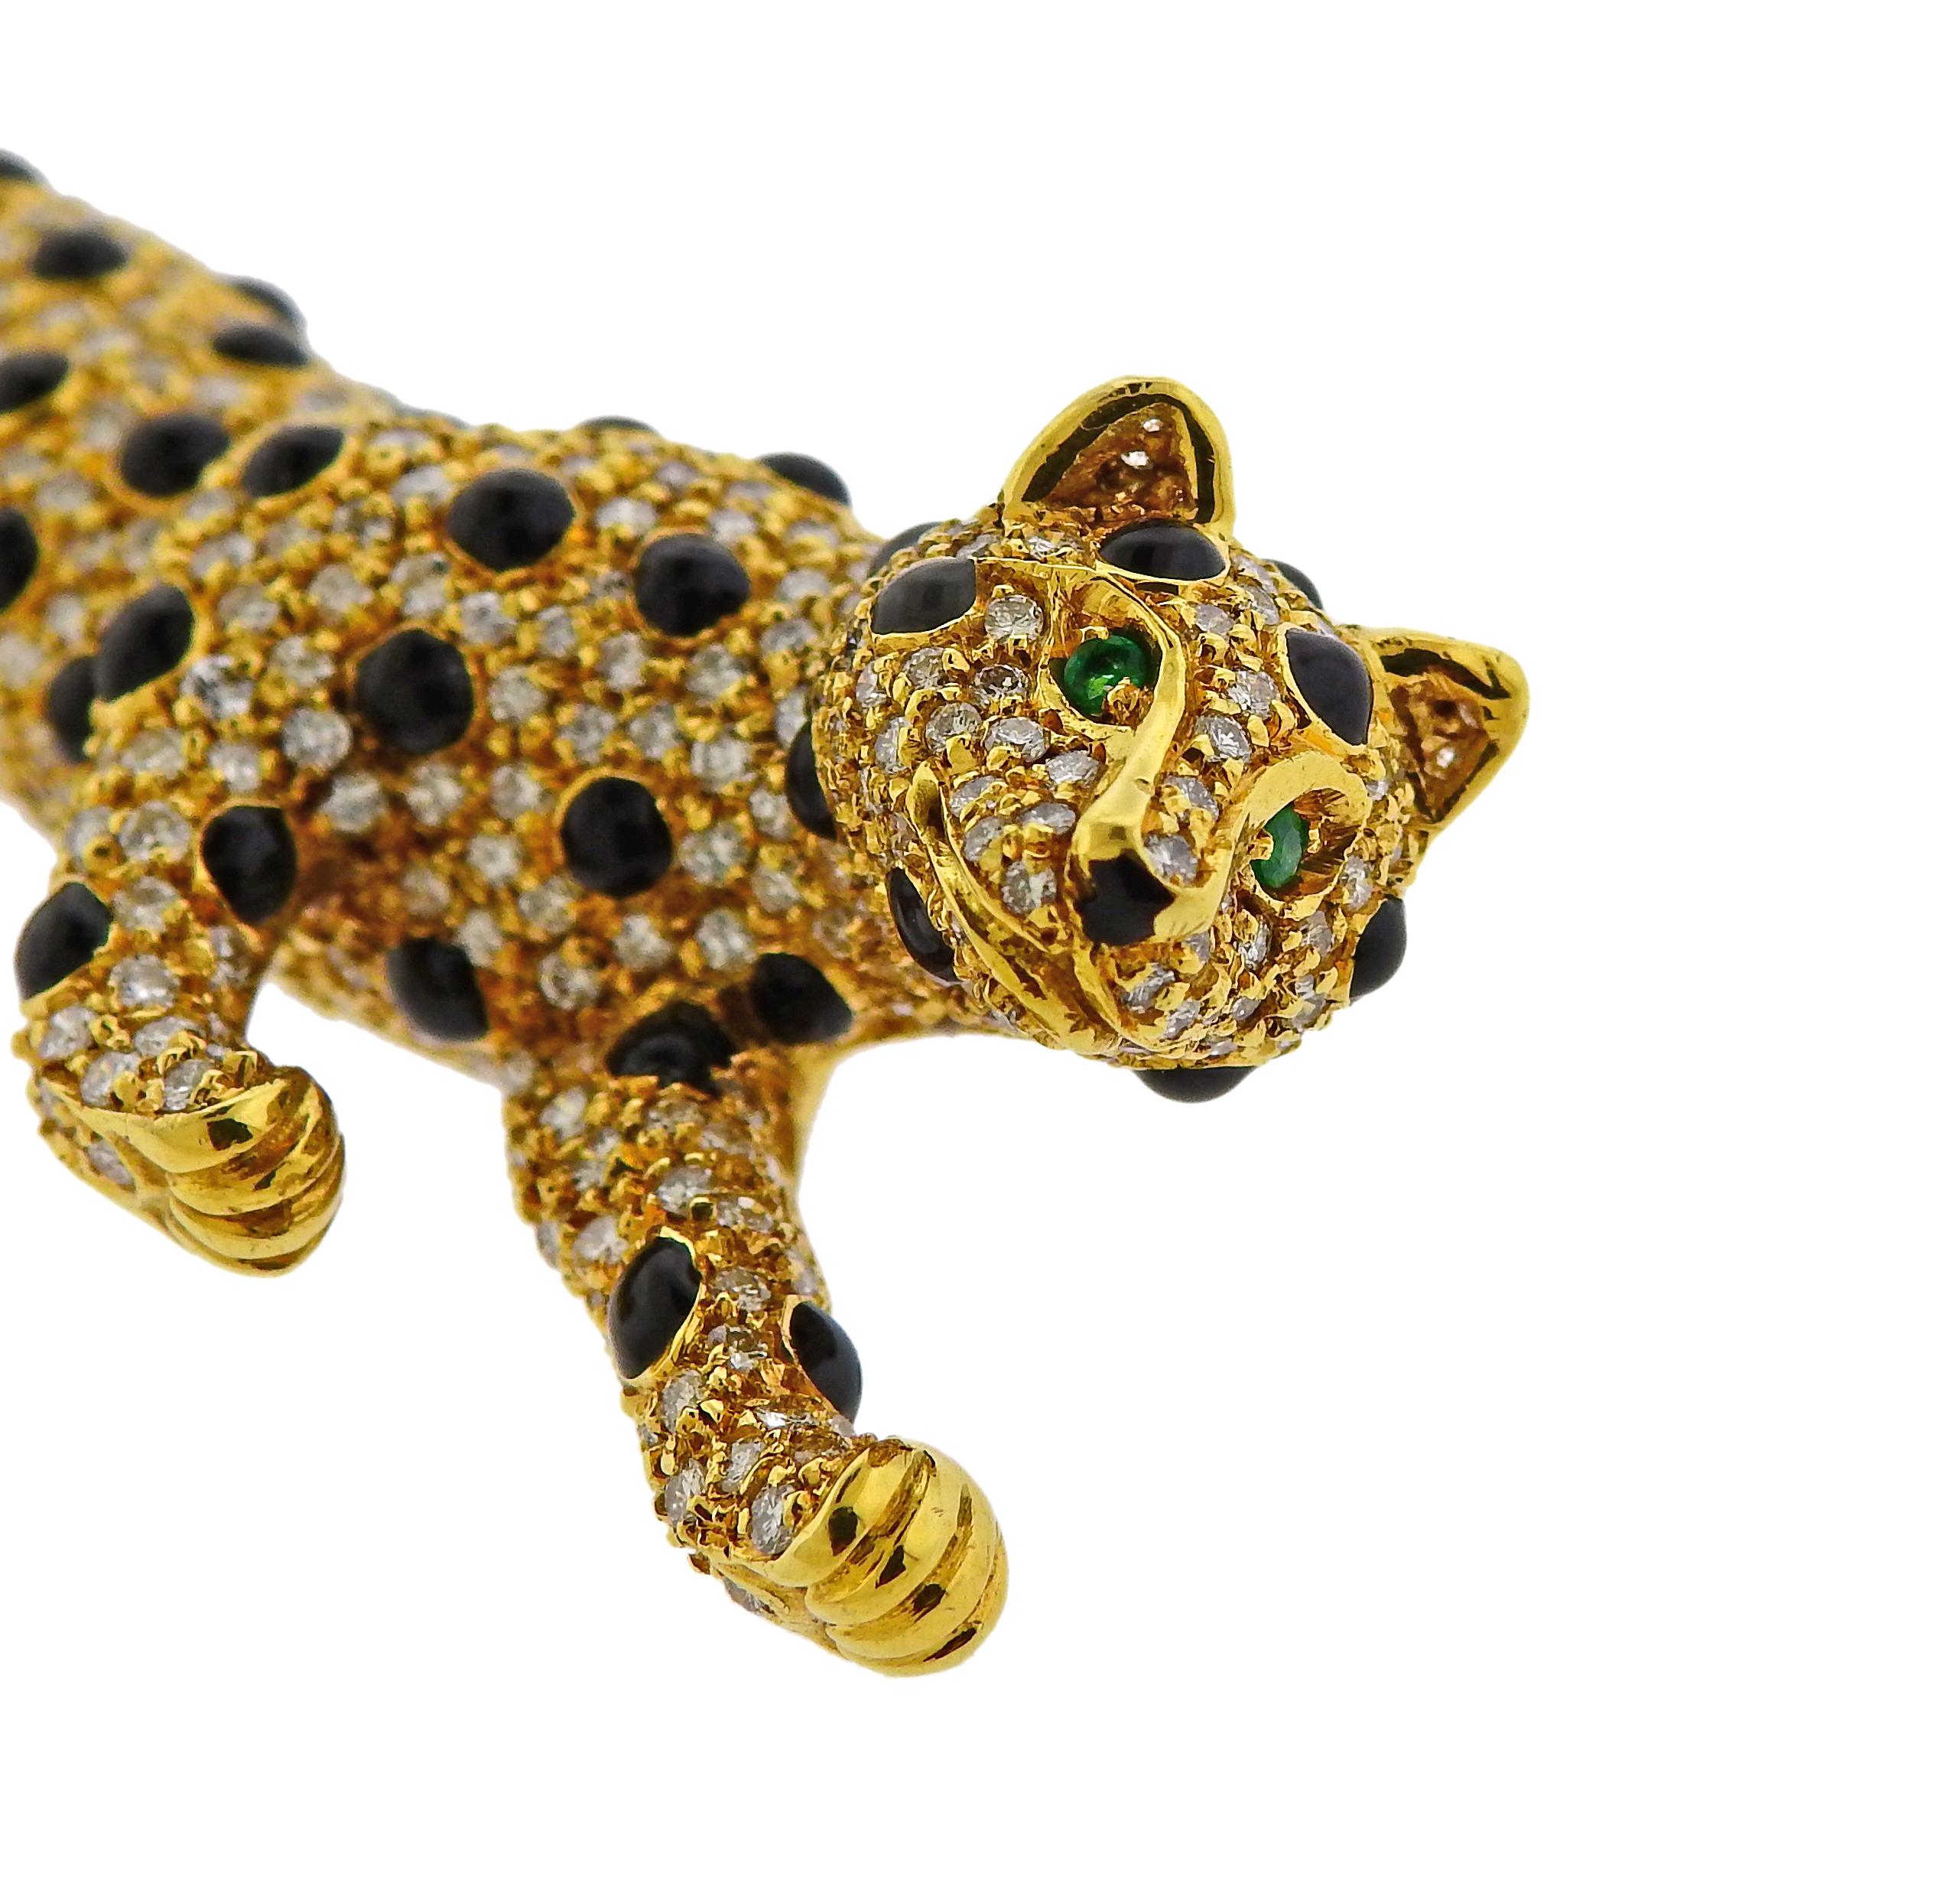 18k yellow gold panther brooch, decorated with emerald eyes, onyx and approx. 1.40ctw in diamonds. Brooch measures 78mm x 24mm, weighs 27.5 grams. Marked 750 and with an Italian mark. 